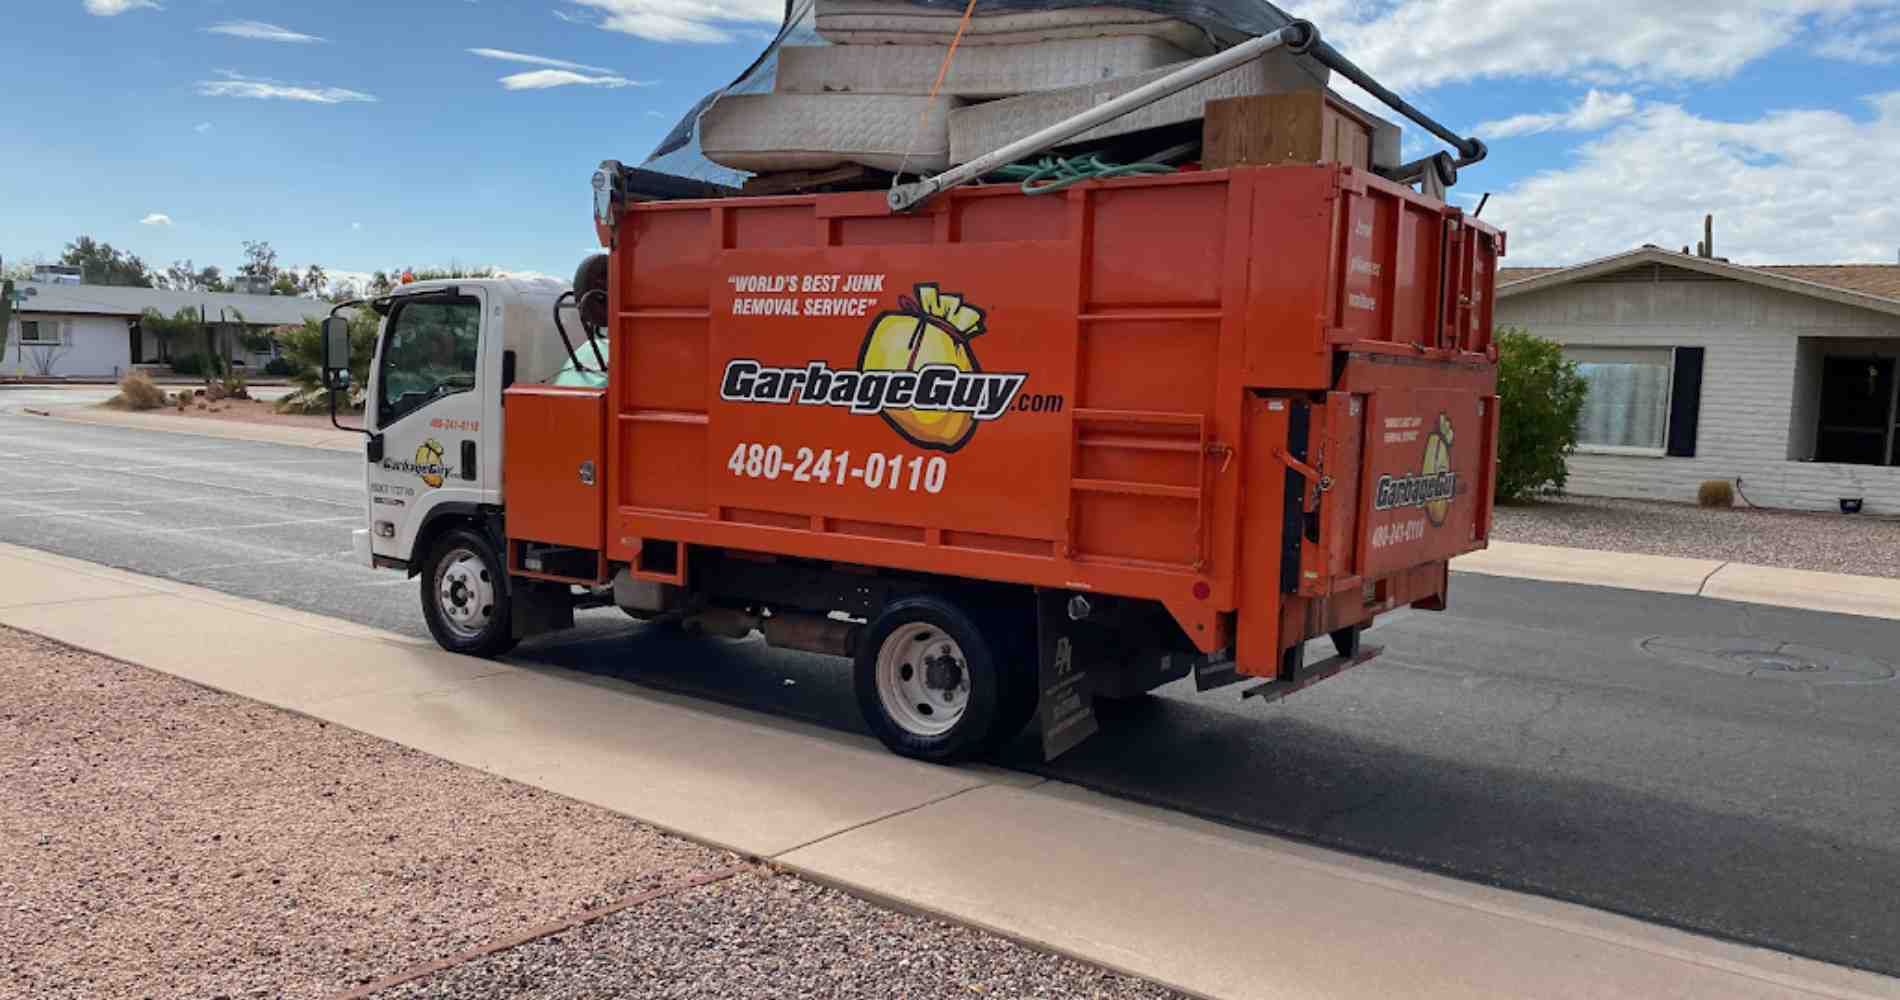 Curbside Trash Pickup in Youngtown, AZ